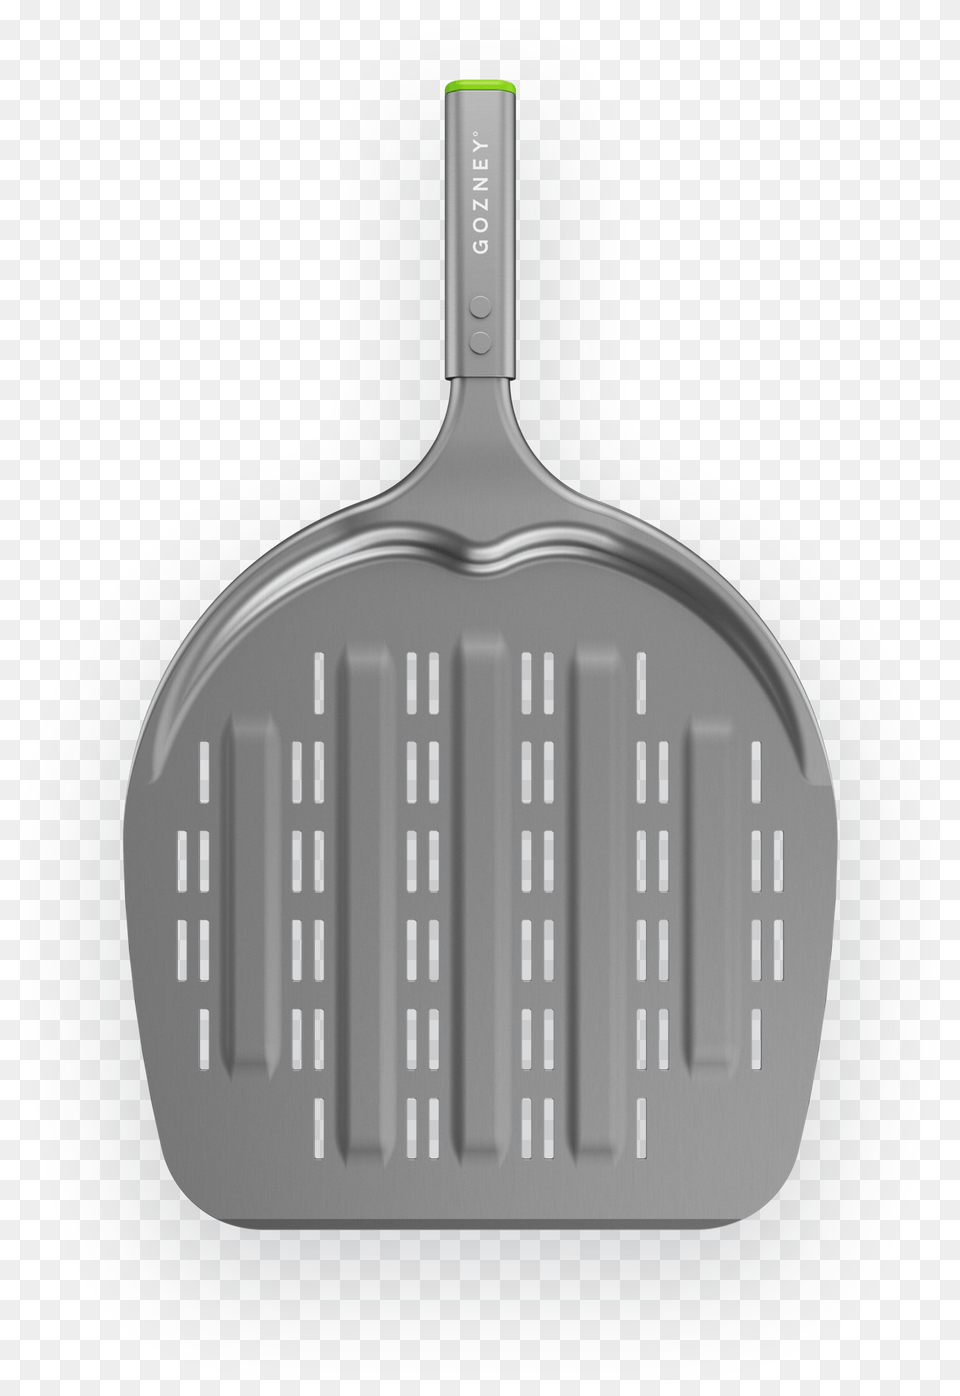 Transparent Roblox Jacketpng The Ultimate Pizza Peel Frying Pan, Racket, Ammunition, Grenade, Weapon Png Image